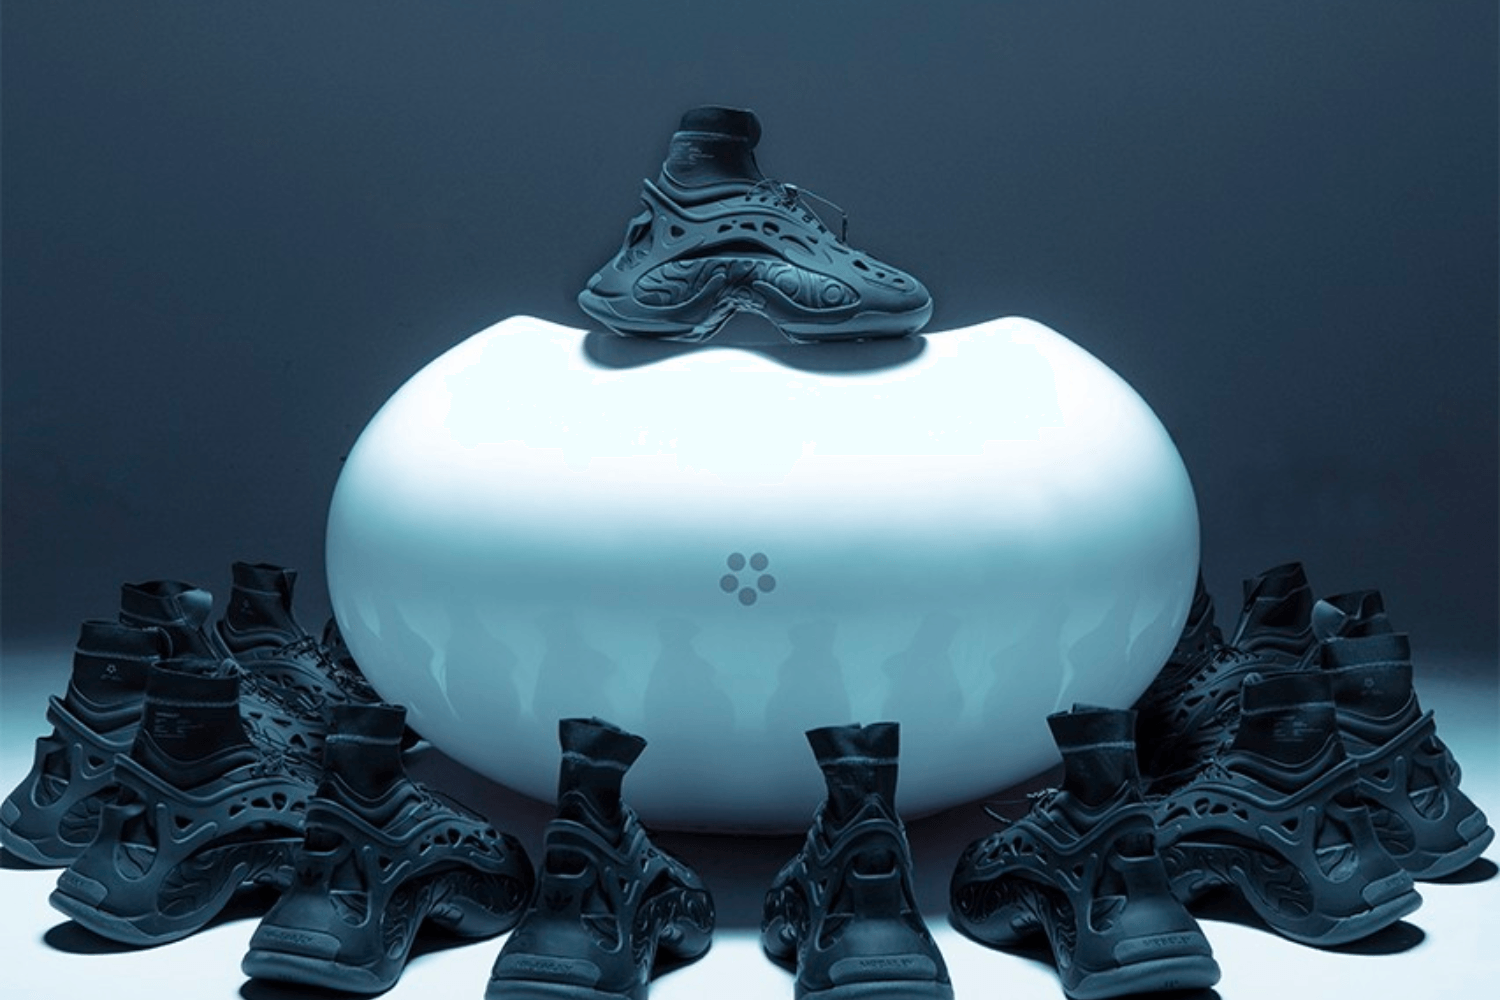 MRBAILEY x adidas Originals 'Ozlucent' is inspired by moon jellyfish